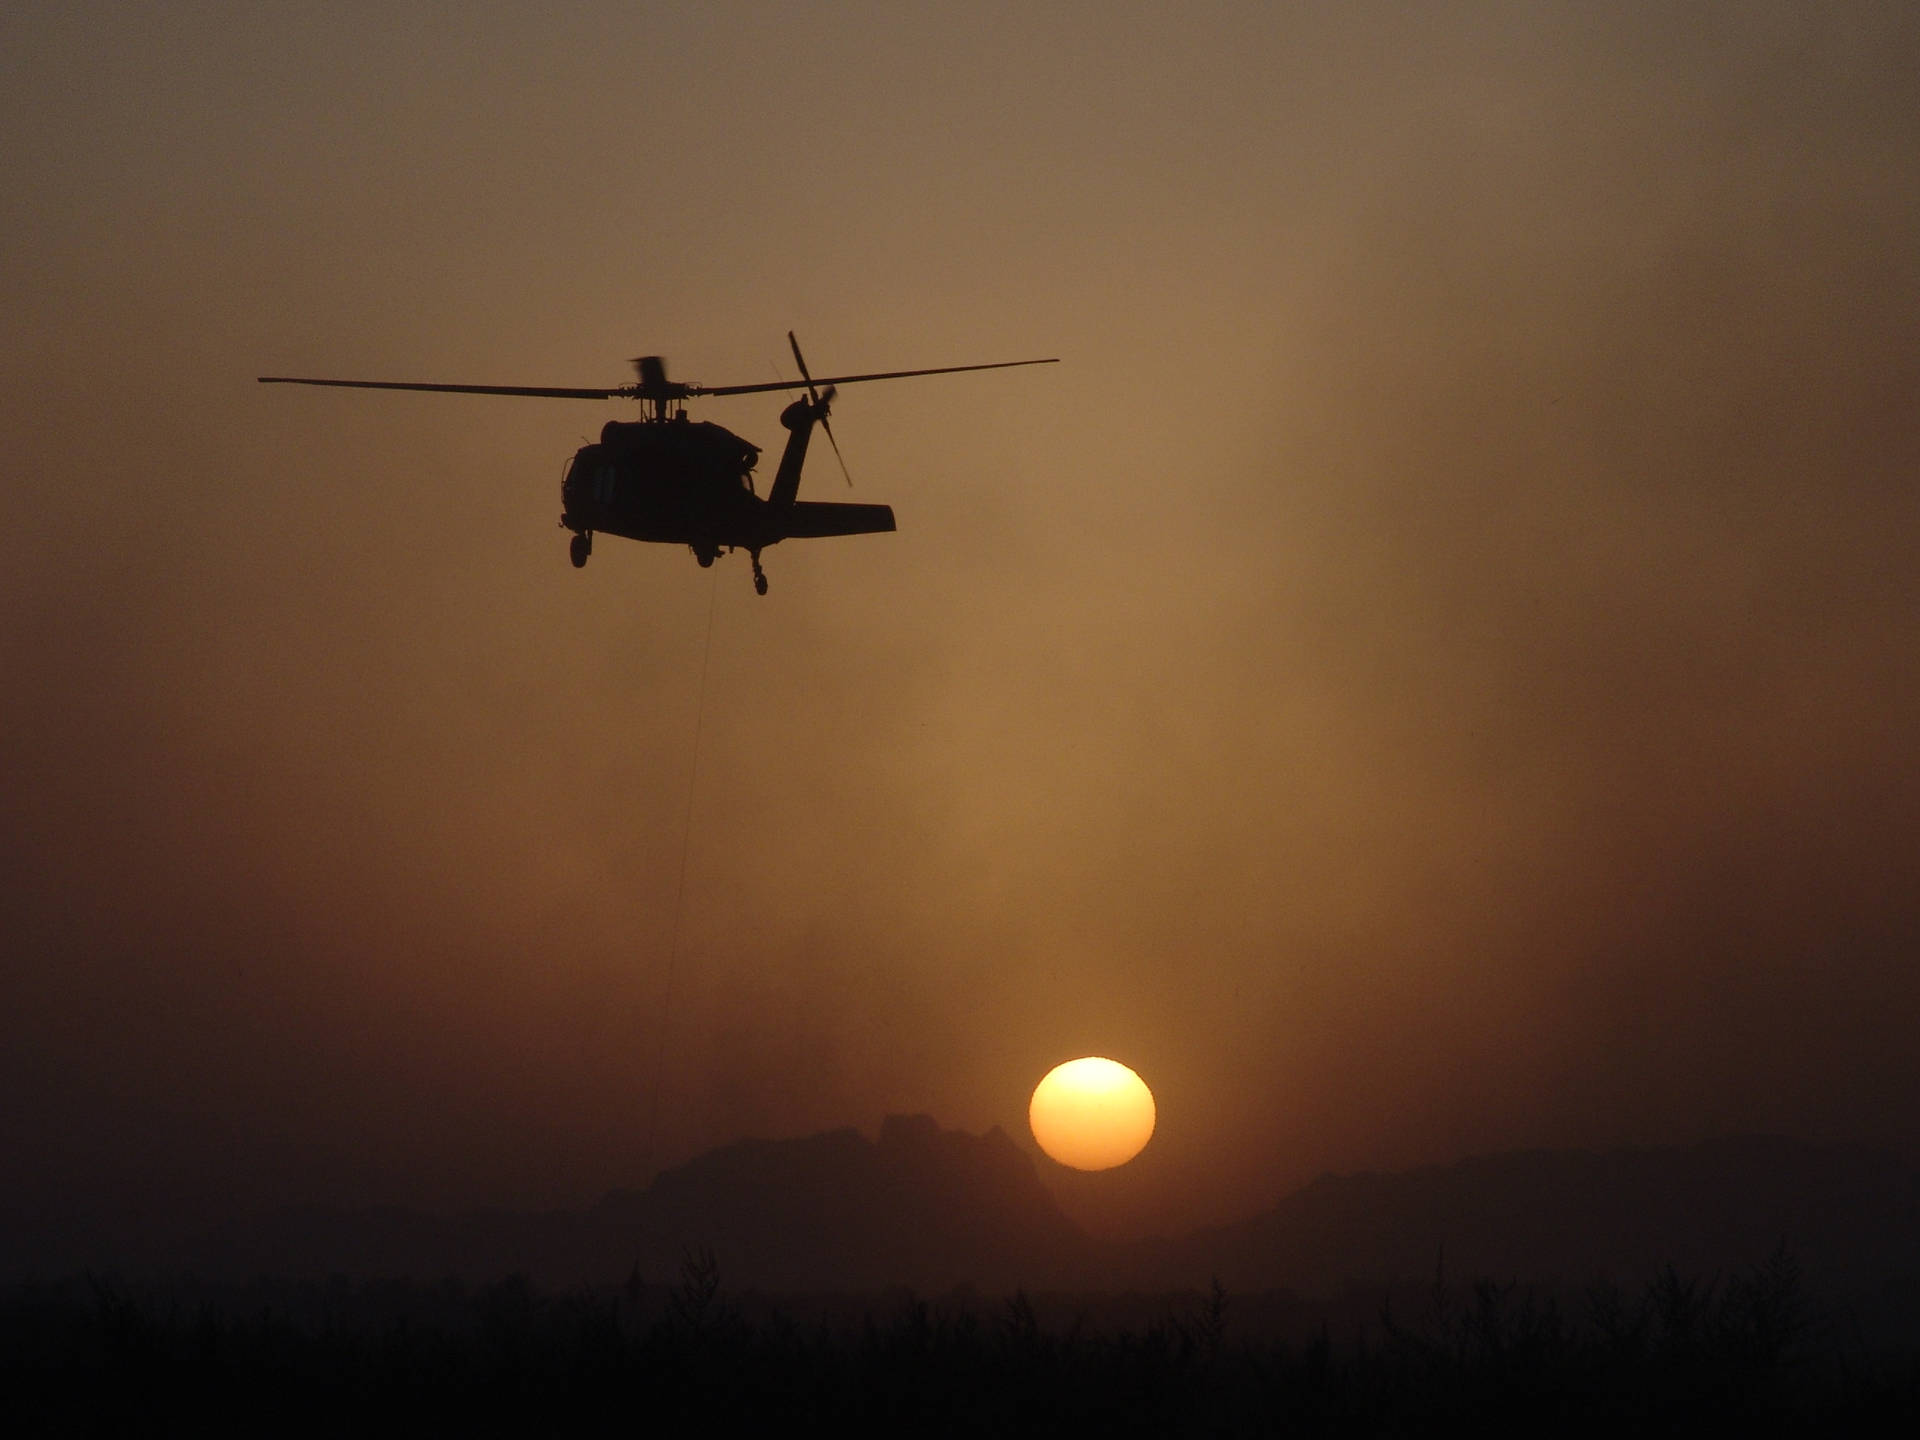 Hd Plane Helicopter Dusk Background